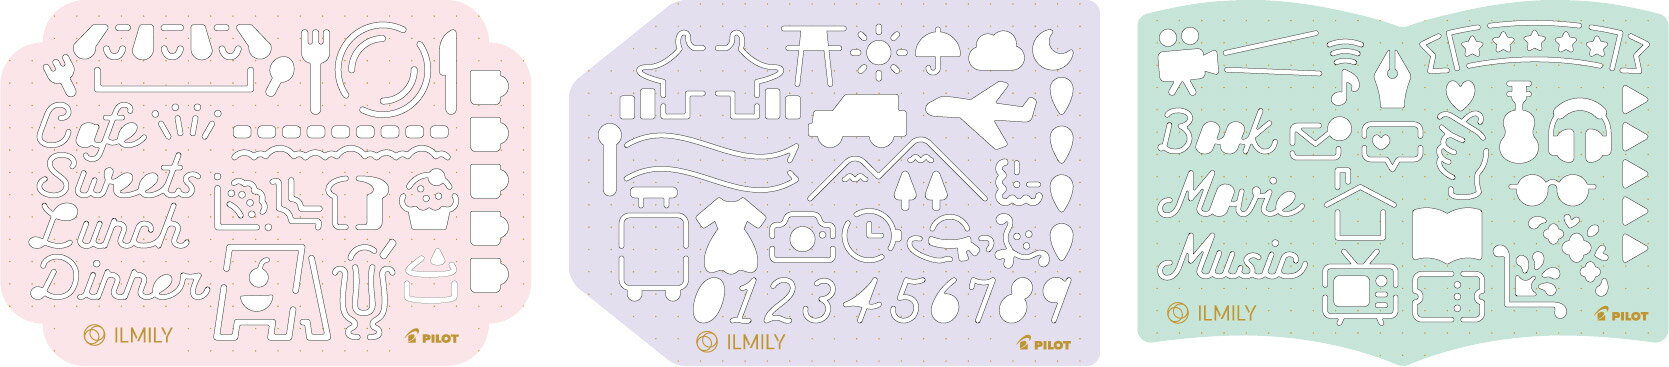 【『ILMILY』第3弾登場】パイロットILMILY Color two color テンプレートイルミリー カラー to カラーTNIL02S-45テンプレート【数量限定】